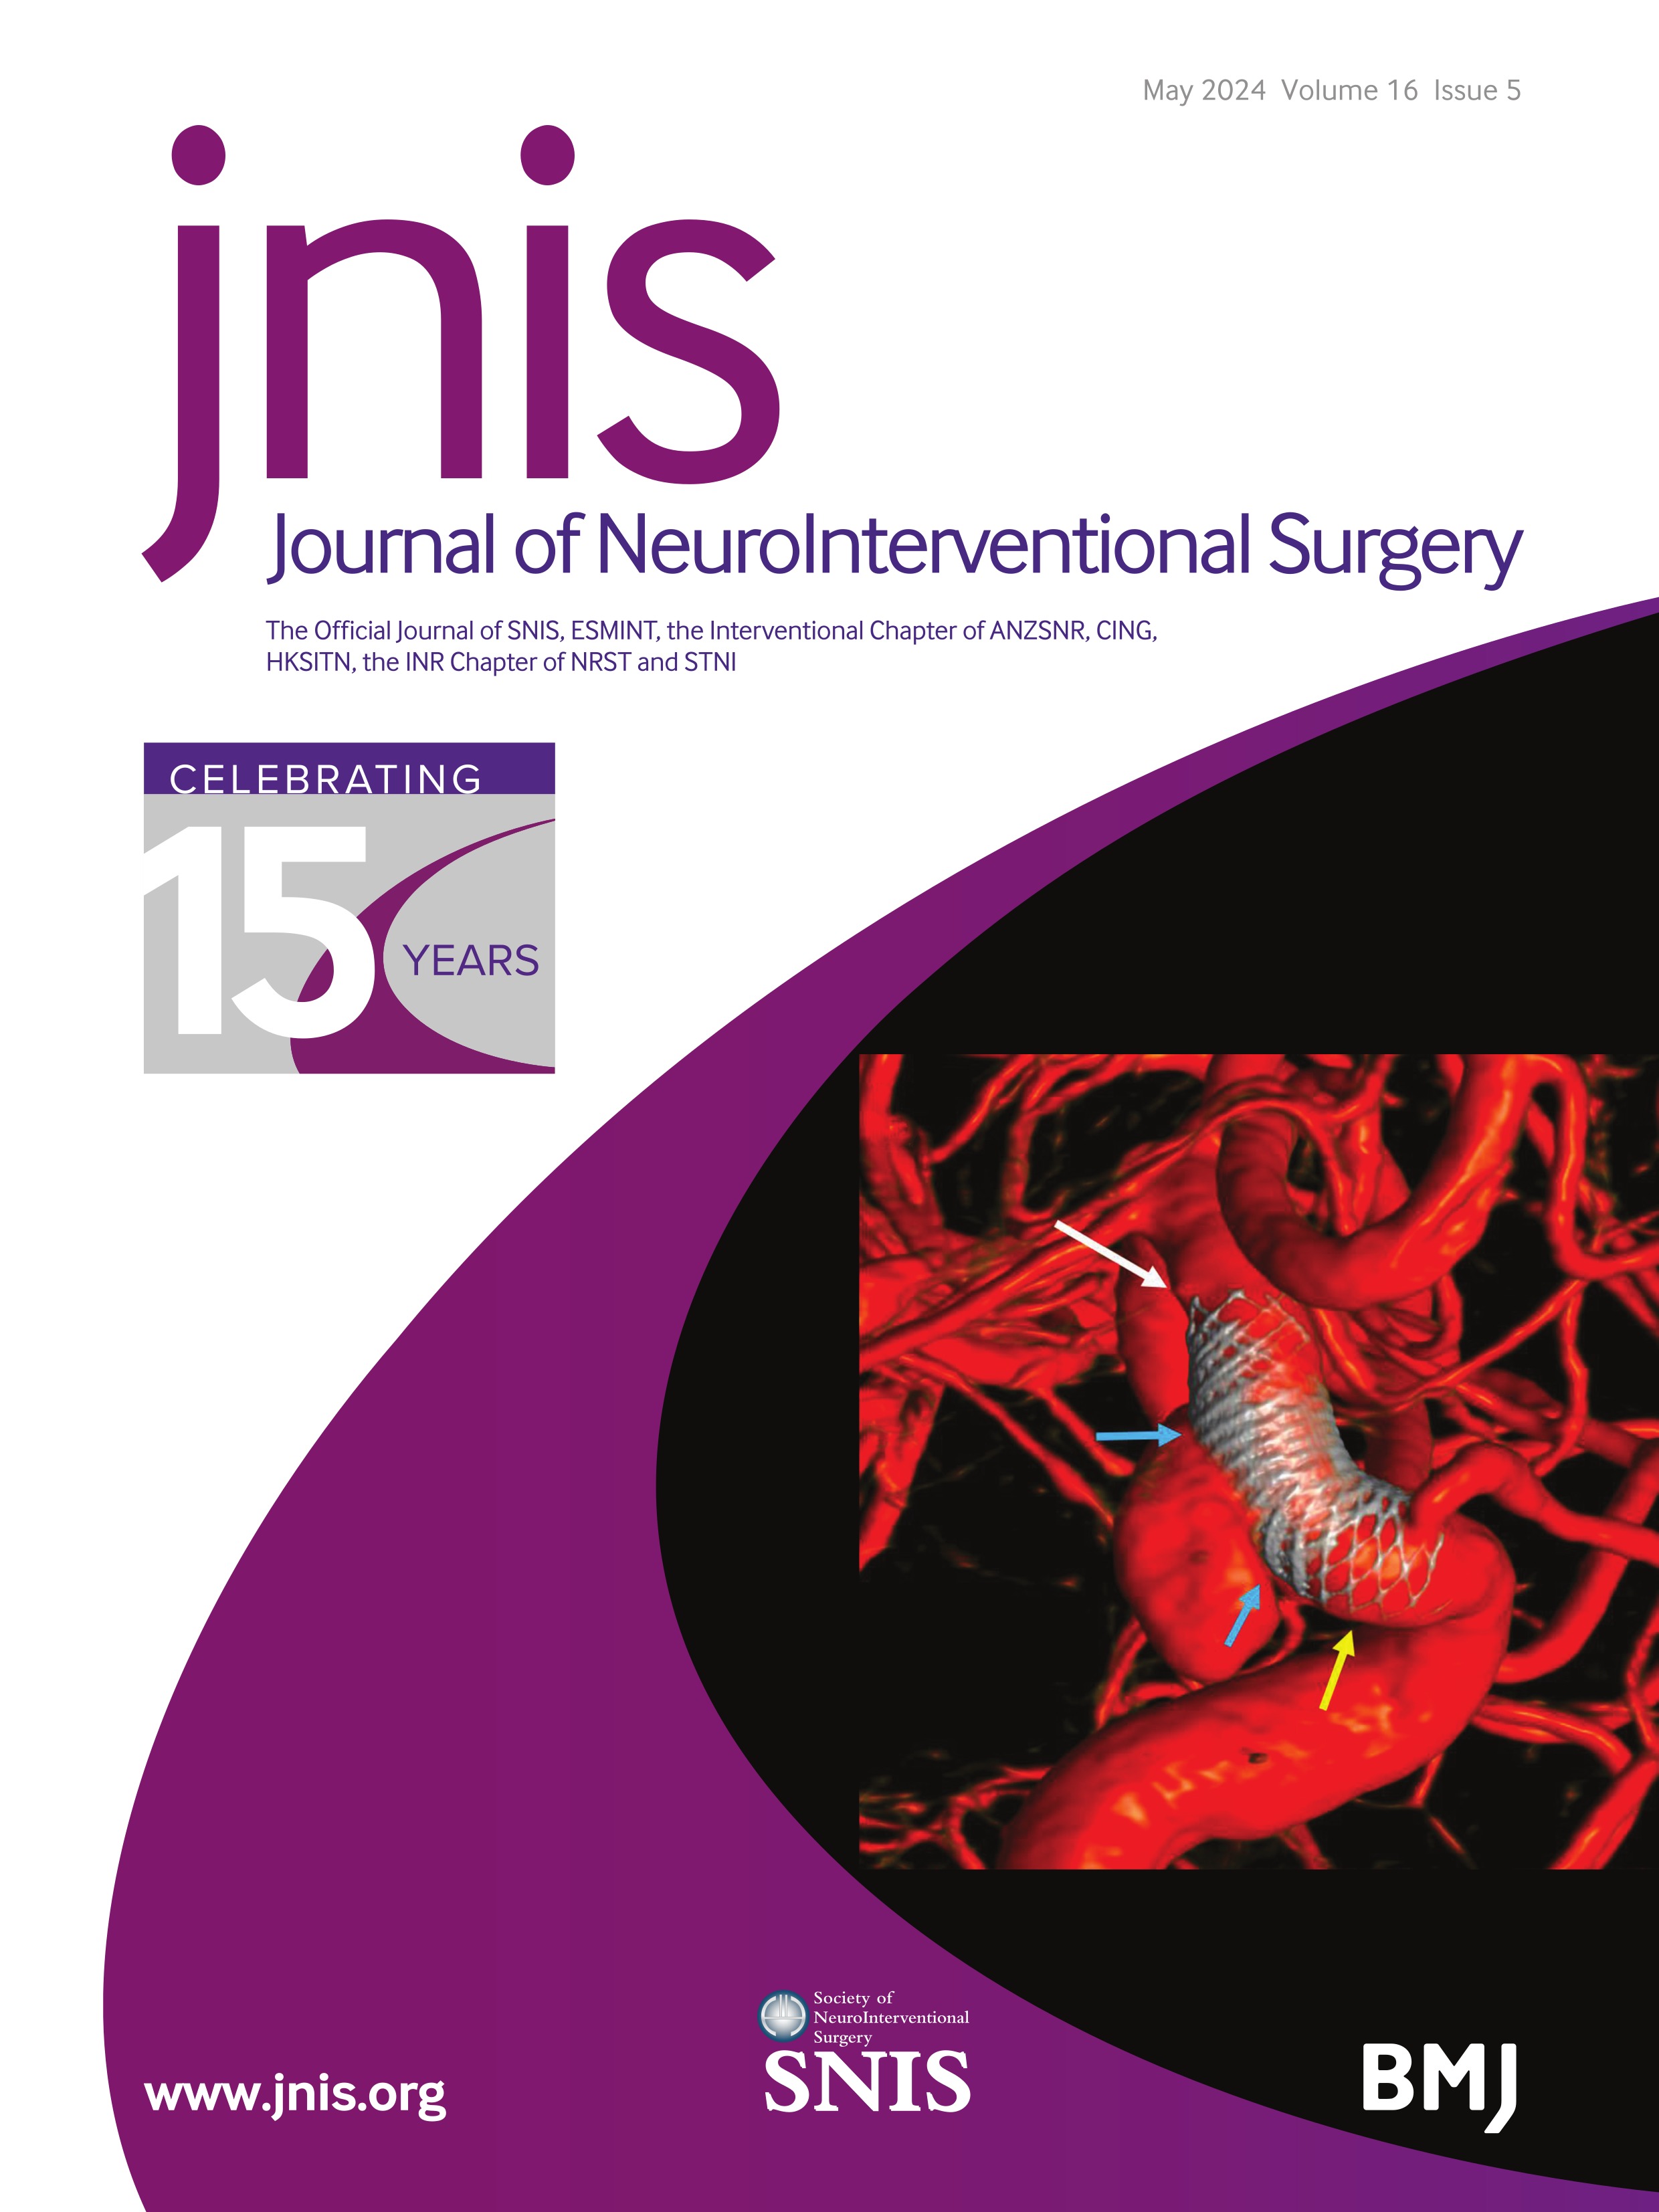 Intracranial atherosclerosis update for neurointerventionalists